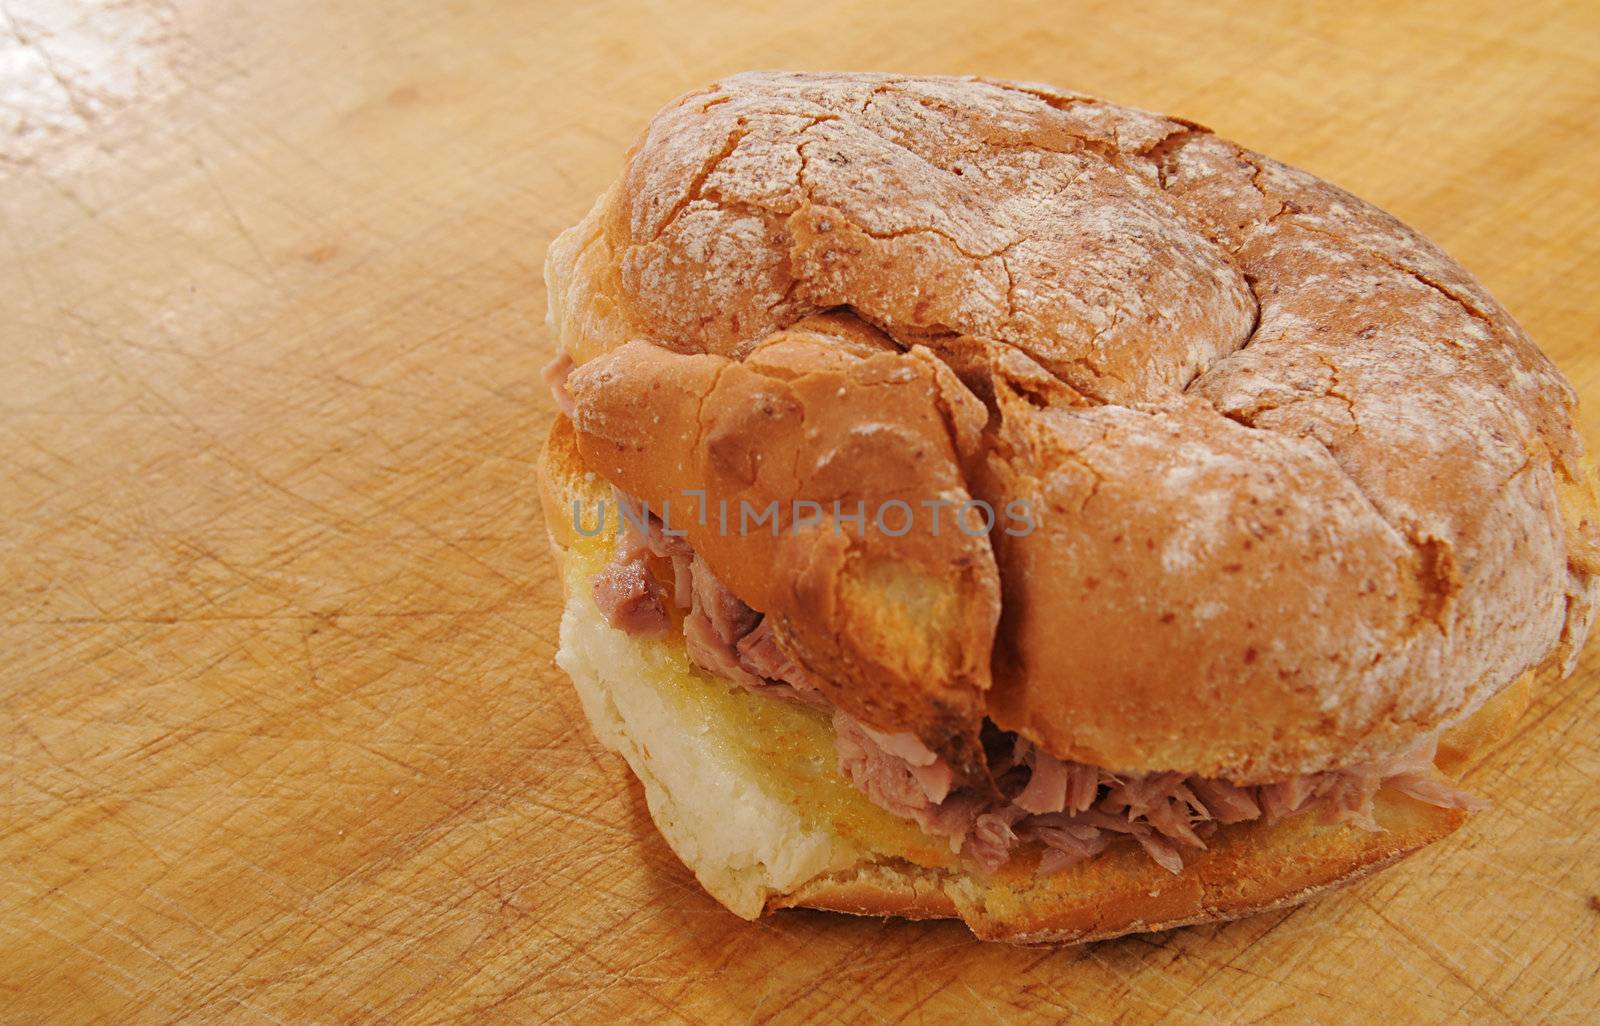 Tuna and Mayo in bread roll on a wooden table, shot against black.